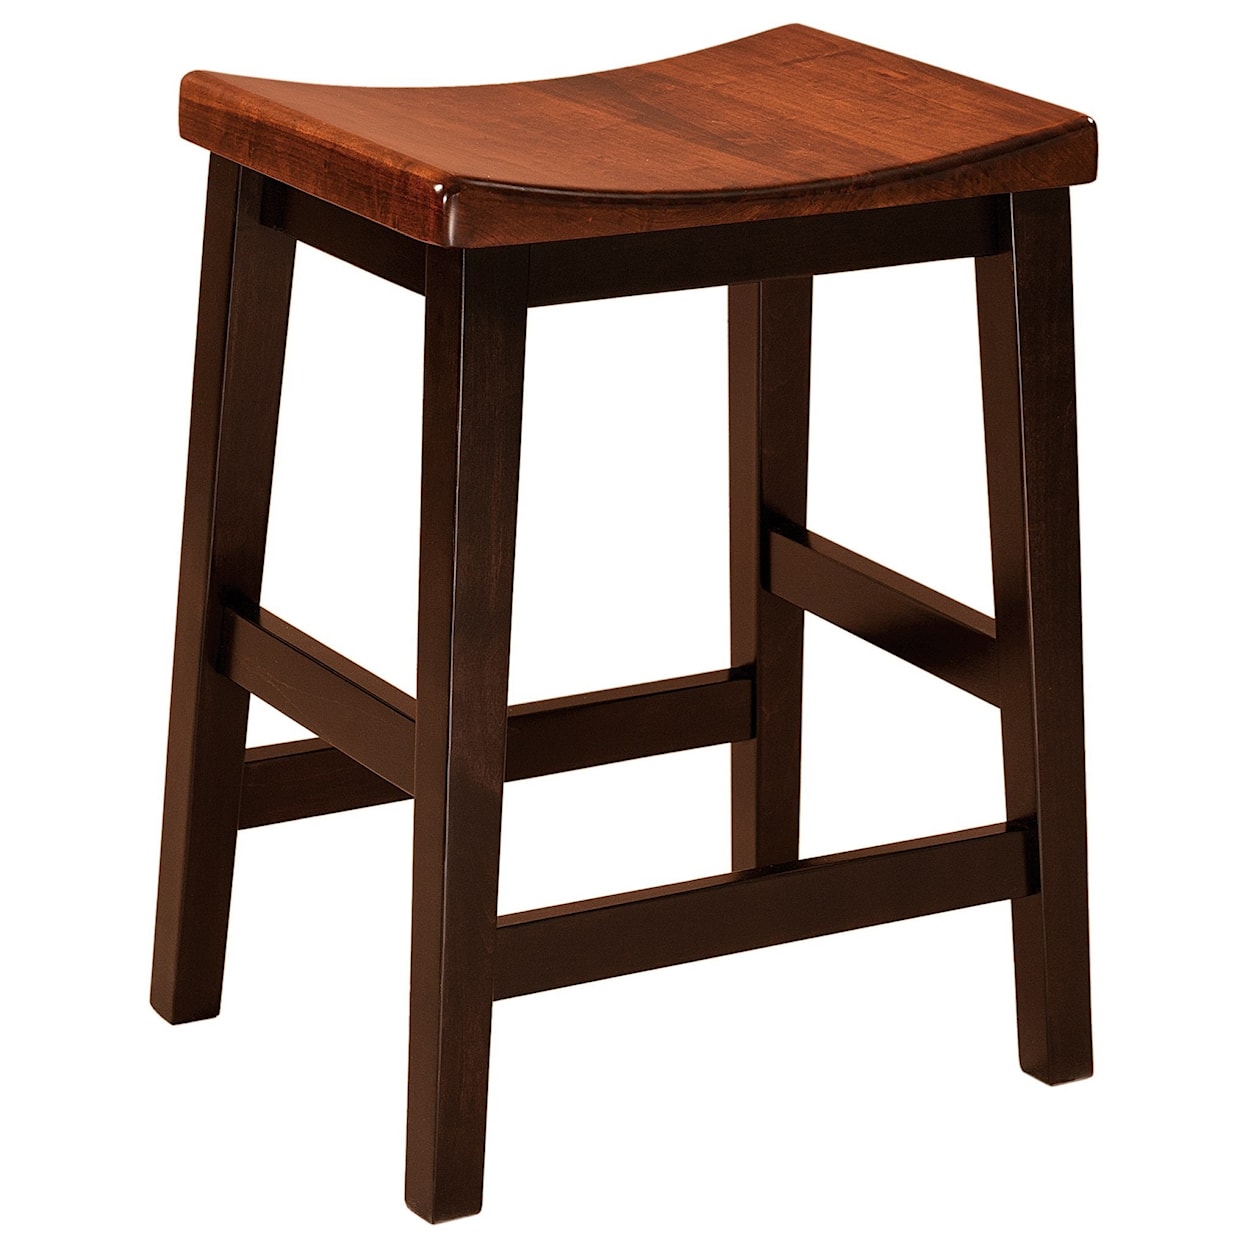 F&N Woodworking Coby Bar Stool 24" Height - Leather Seat